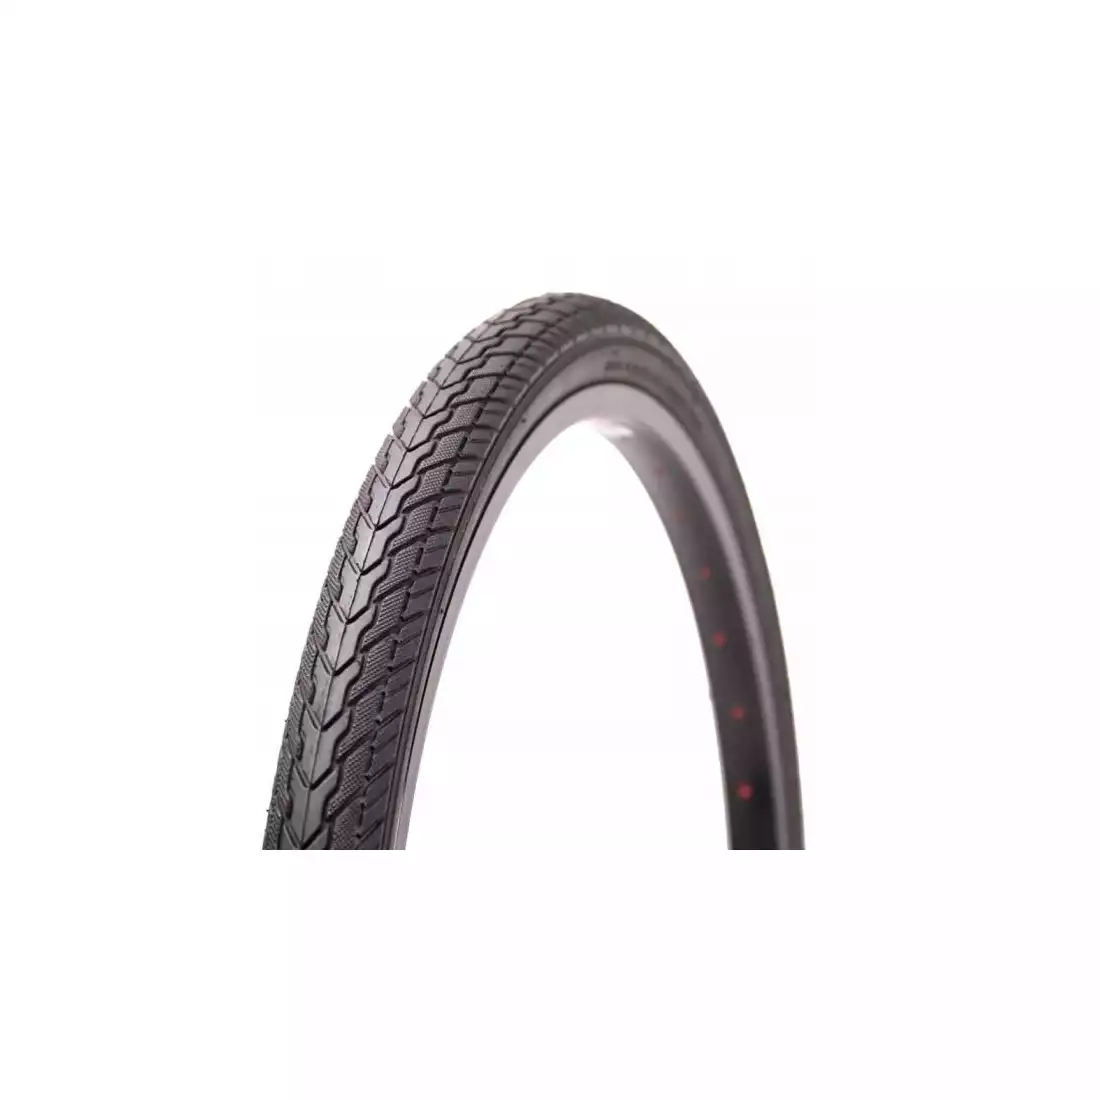 FREEDOM WEDGE sport road bicycle tire 28x1,75